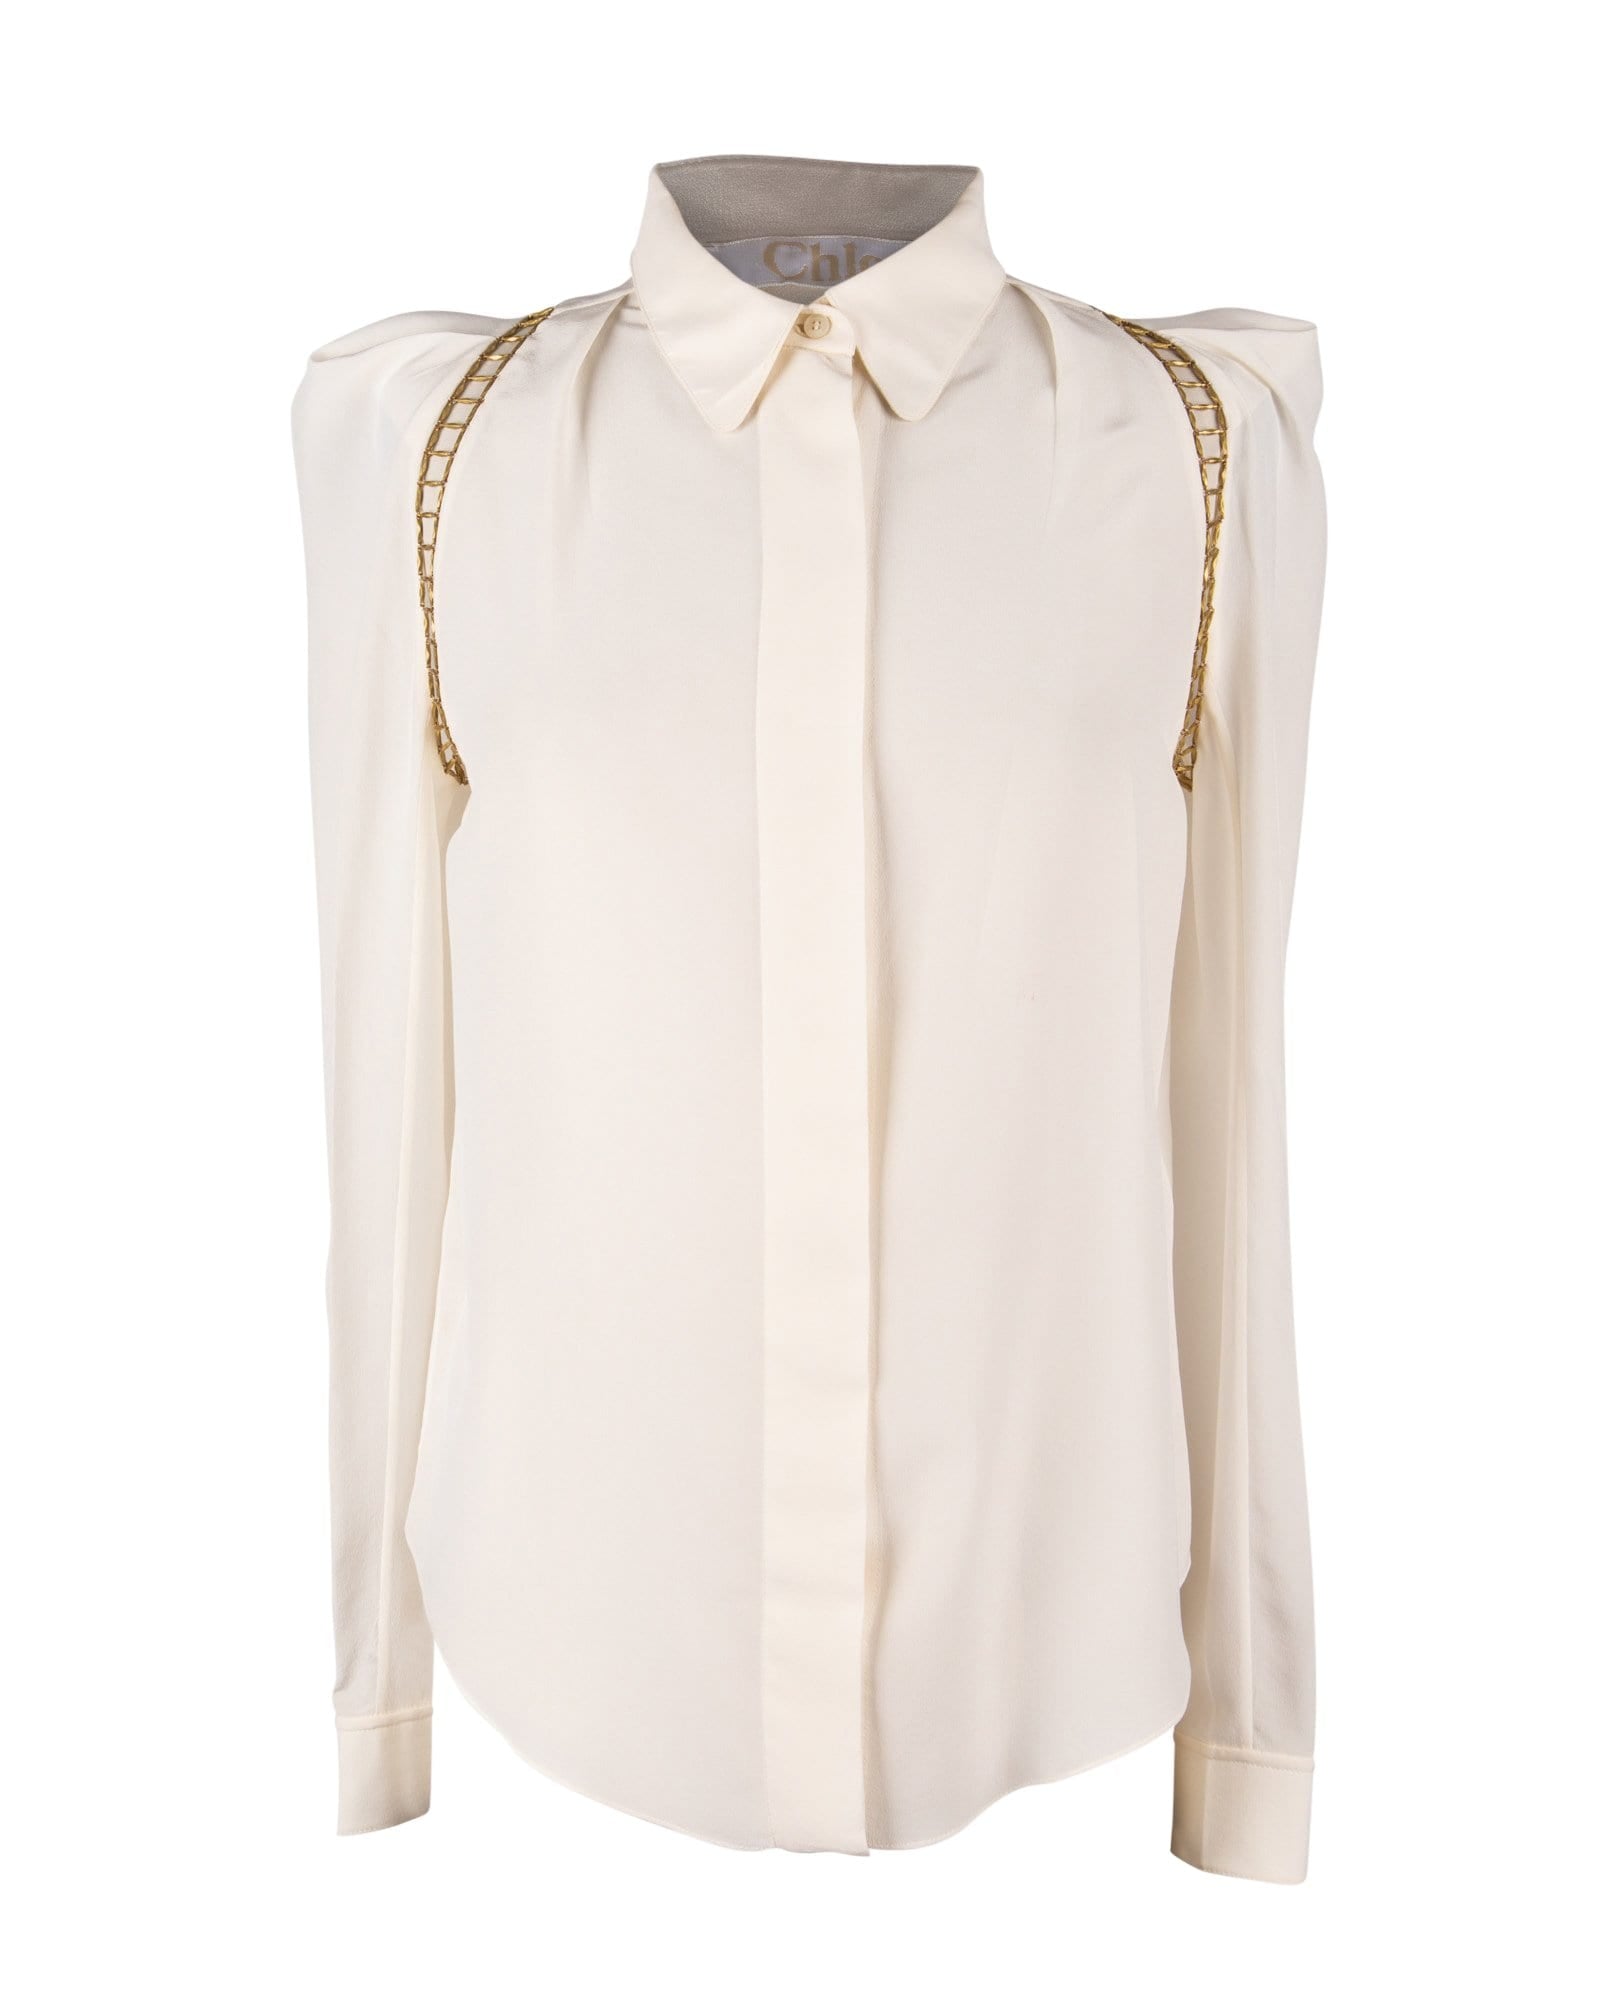 Chloe Top Winter White w/ Open Gold Metal Detail 38 / 6 - mightychic